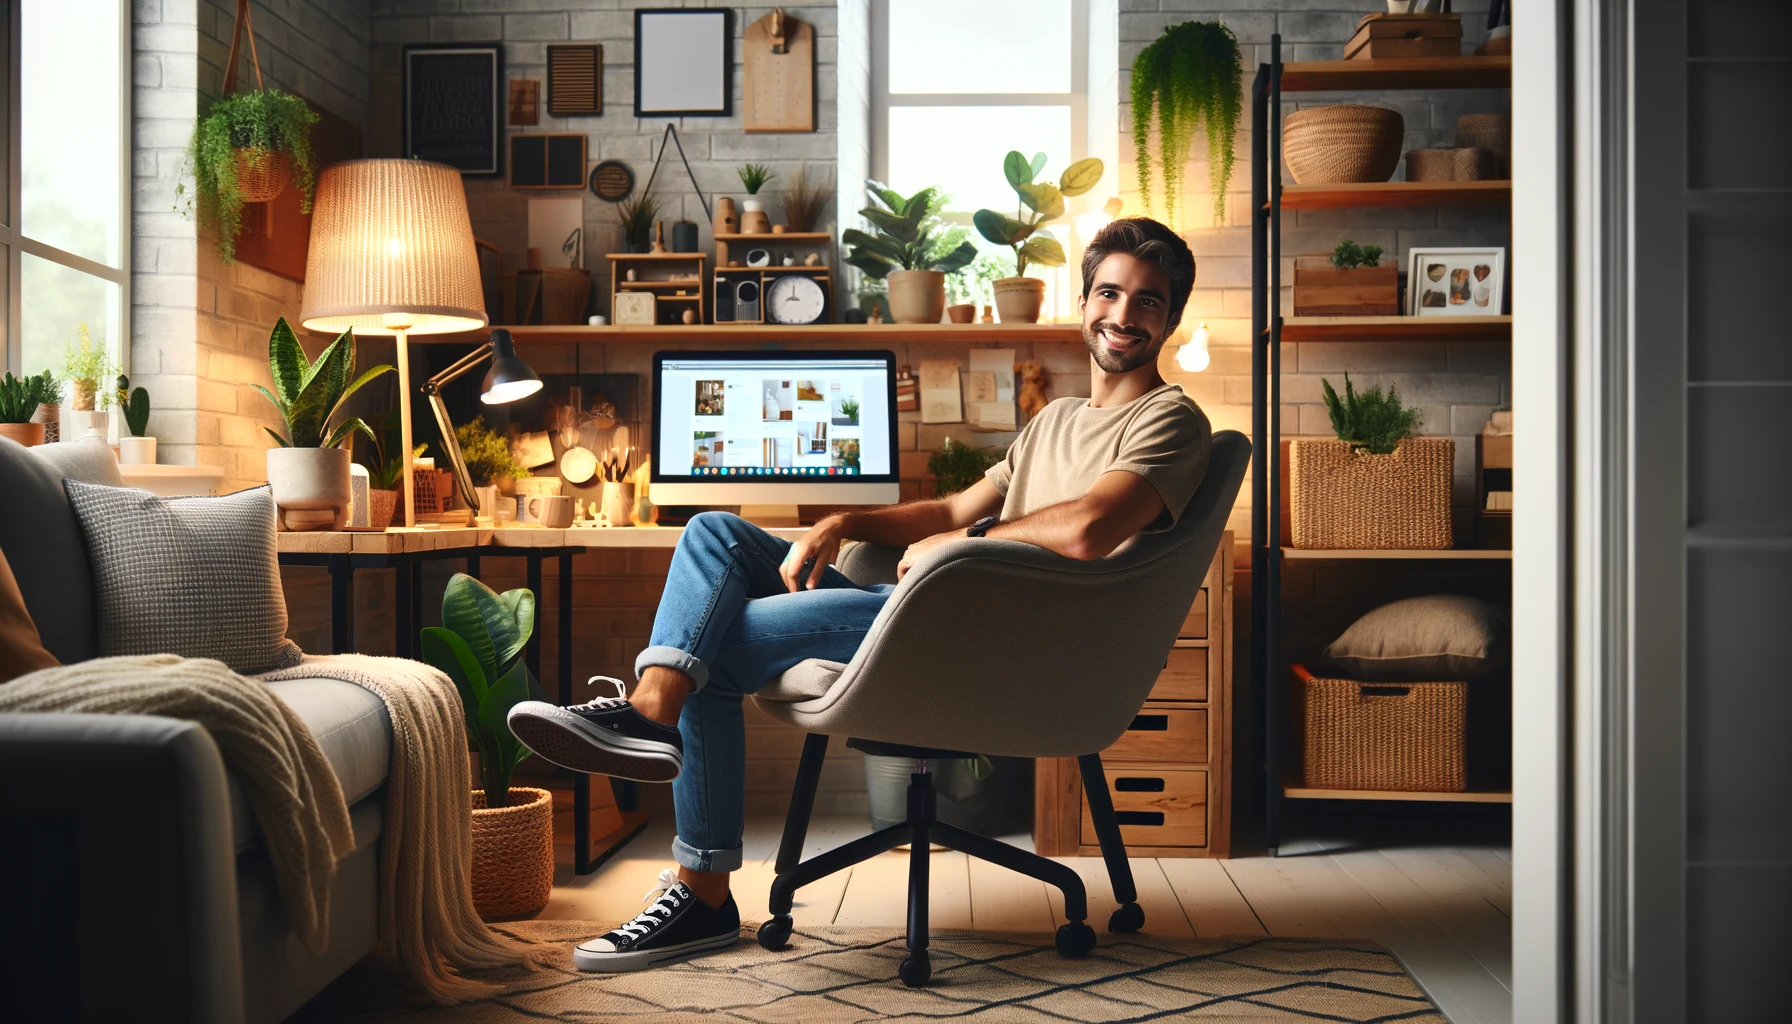 Here's the image featuring a person sitting in their cozy and comfortable home office, looking happy and content. This setting aims to capture the essence of a content creator enjoying their work in a personal and inviting space, possibly engaging with Pinterest ideas and ChatGPT for creative inspiration.